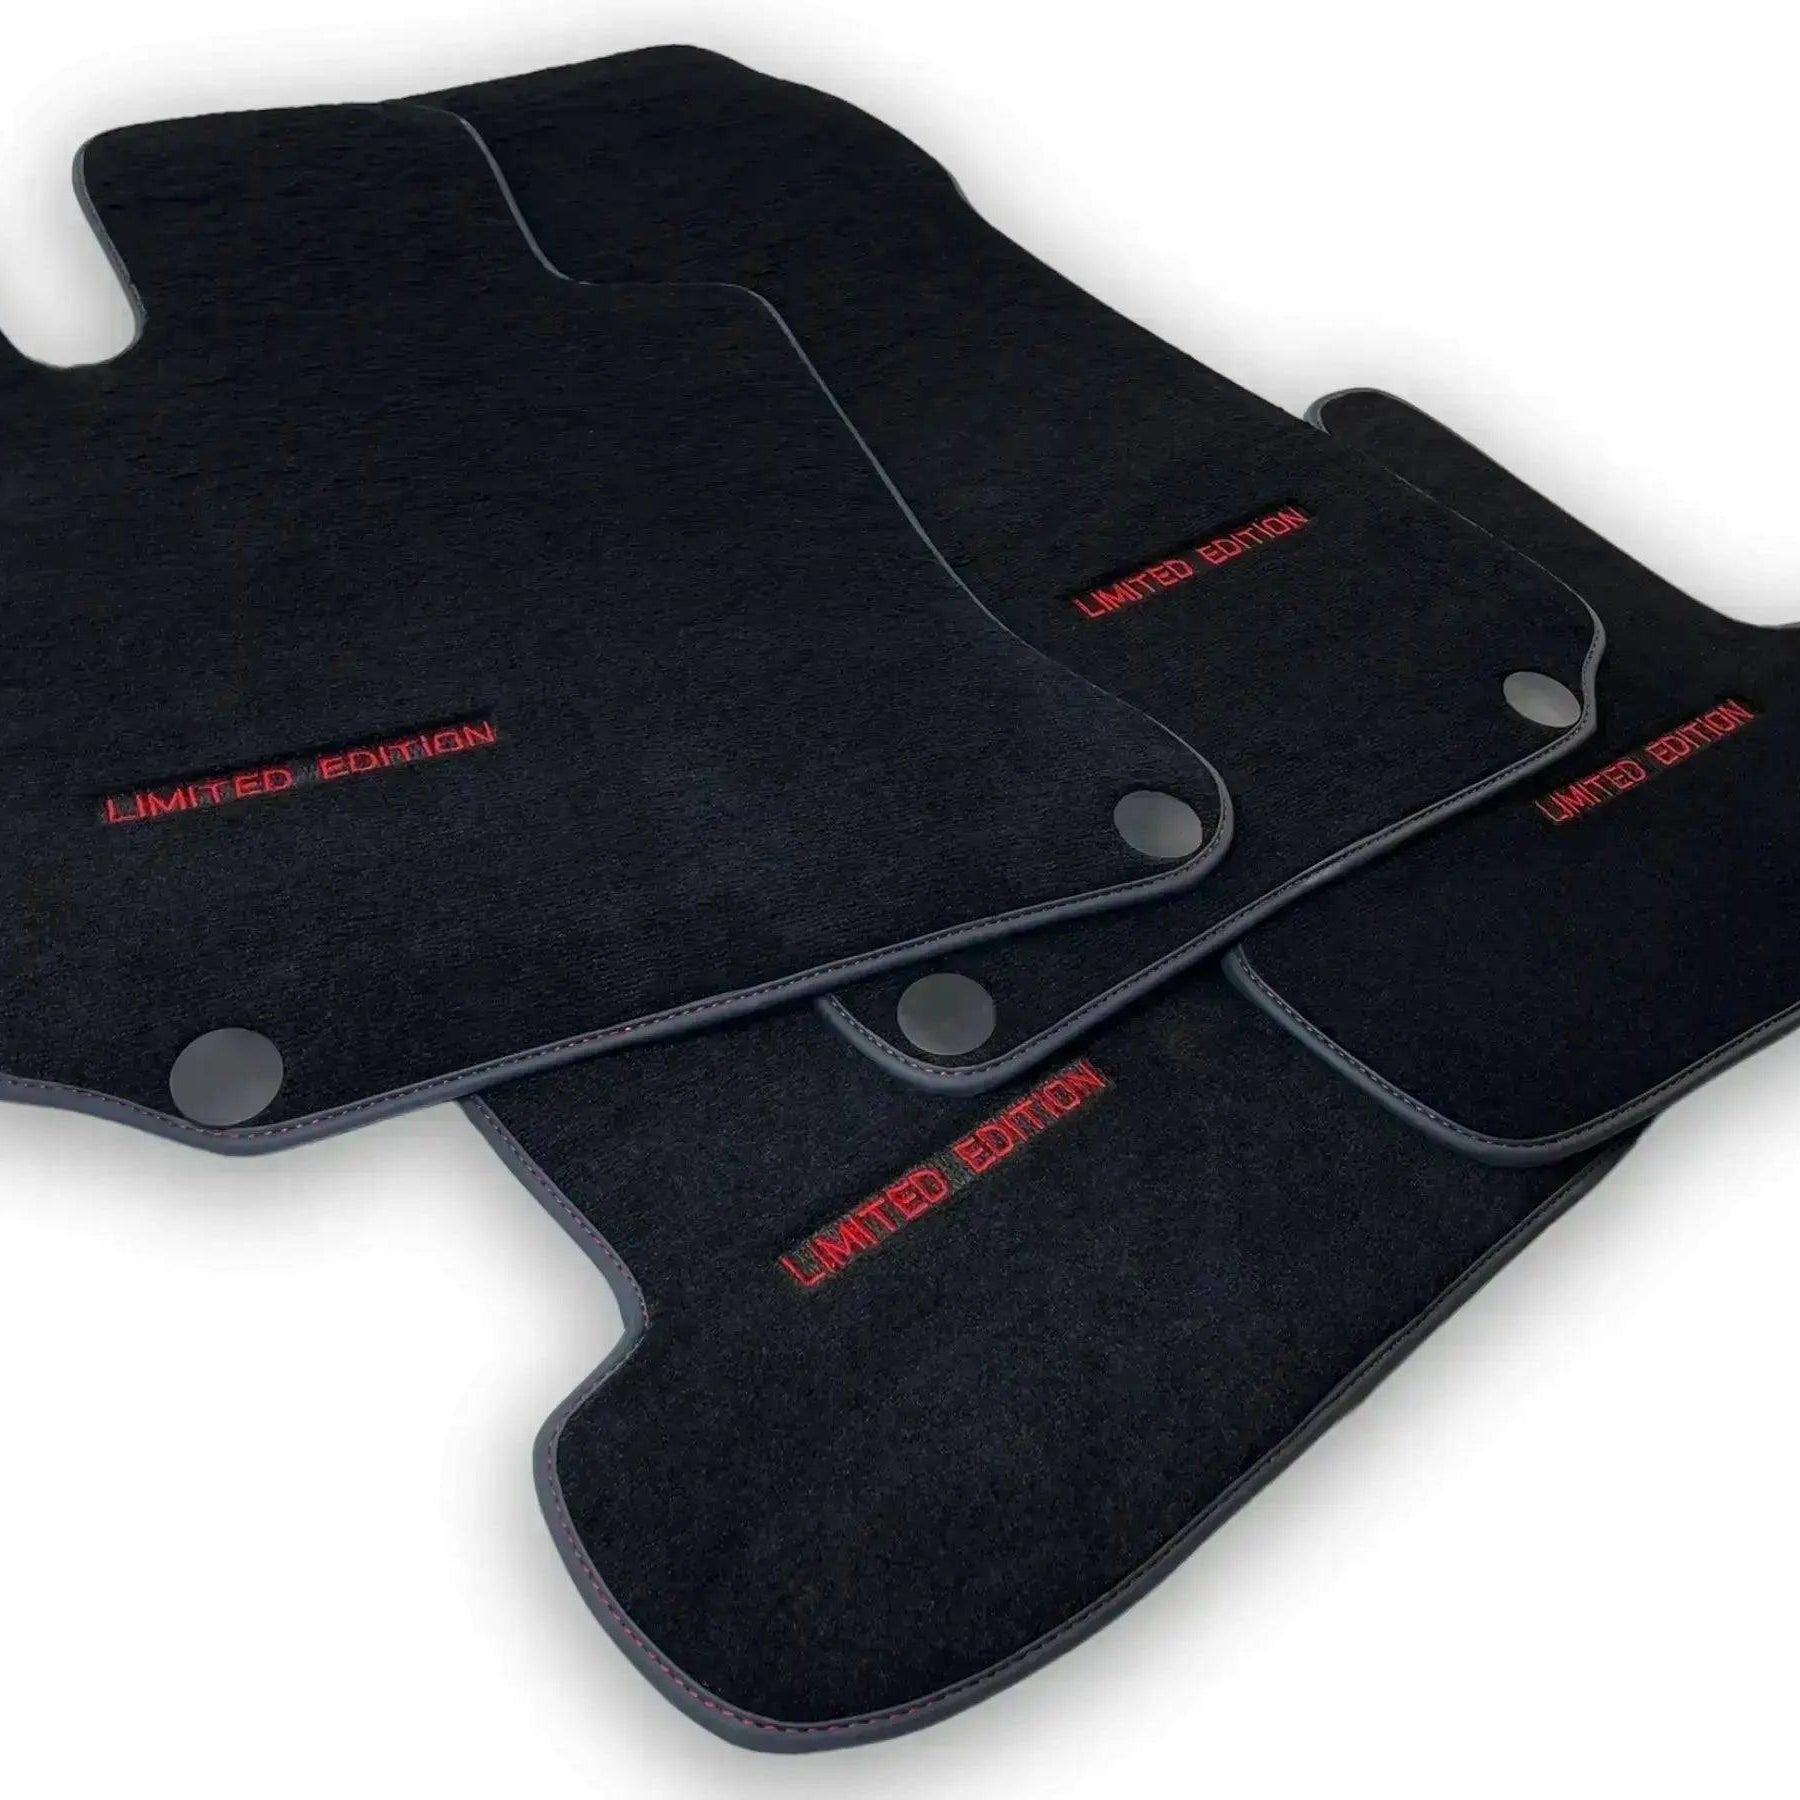 Black Floor Mats For Mercedes Benz S-Class W140 (1991-1998) | Limited Edition